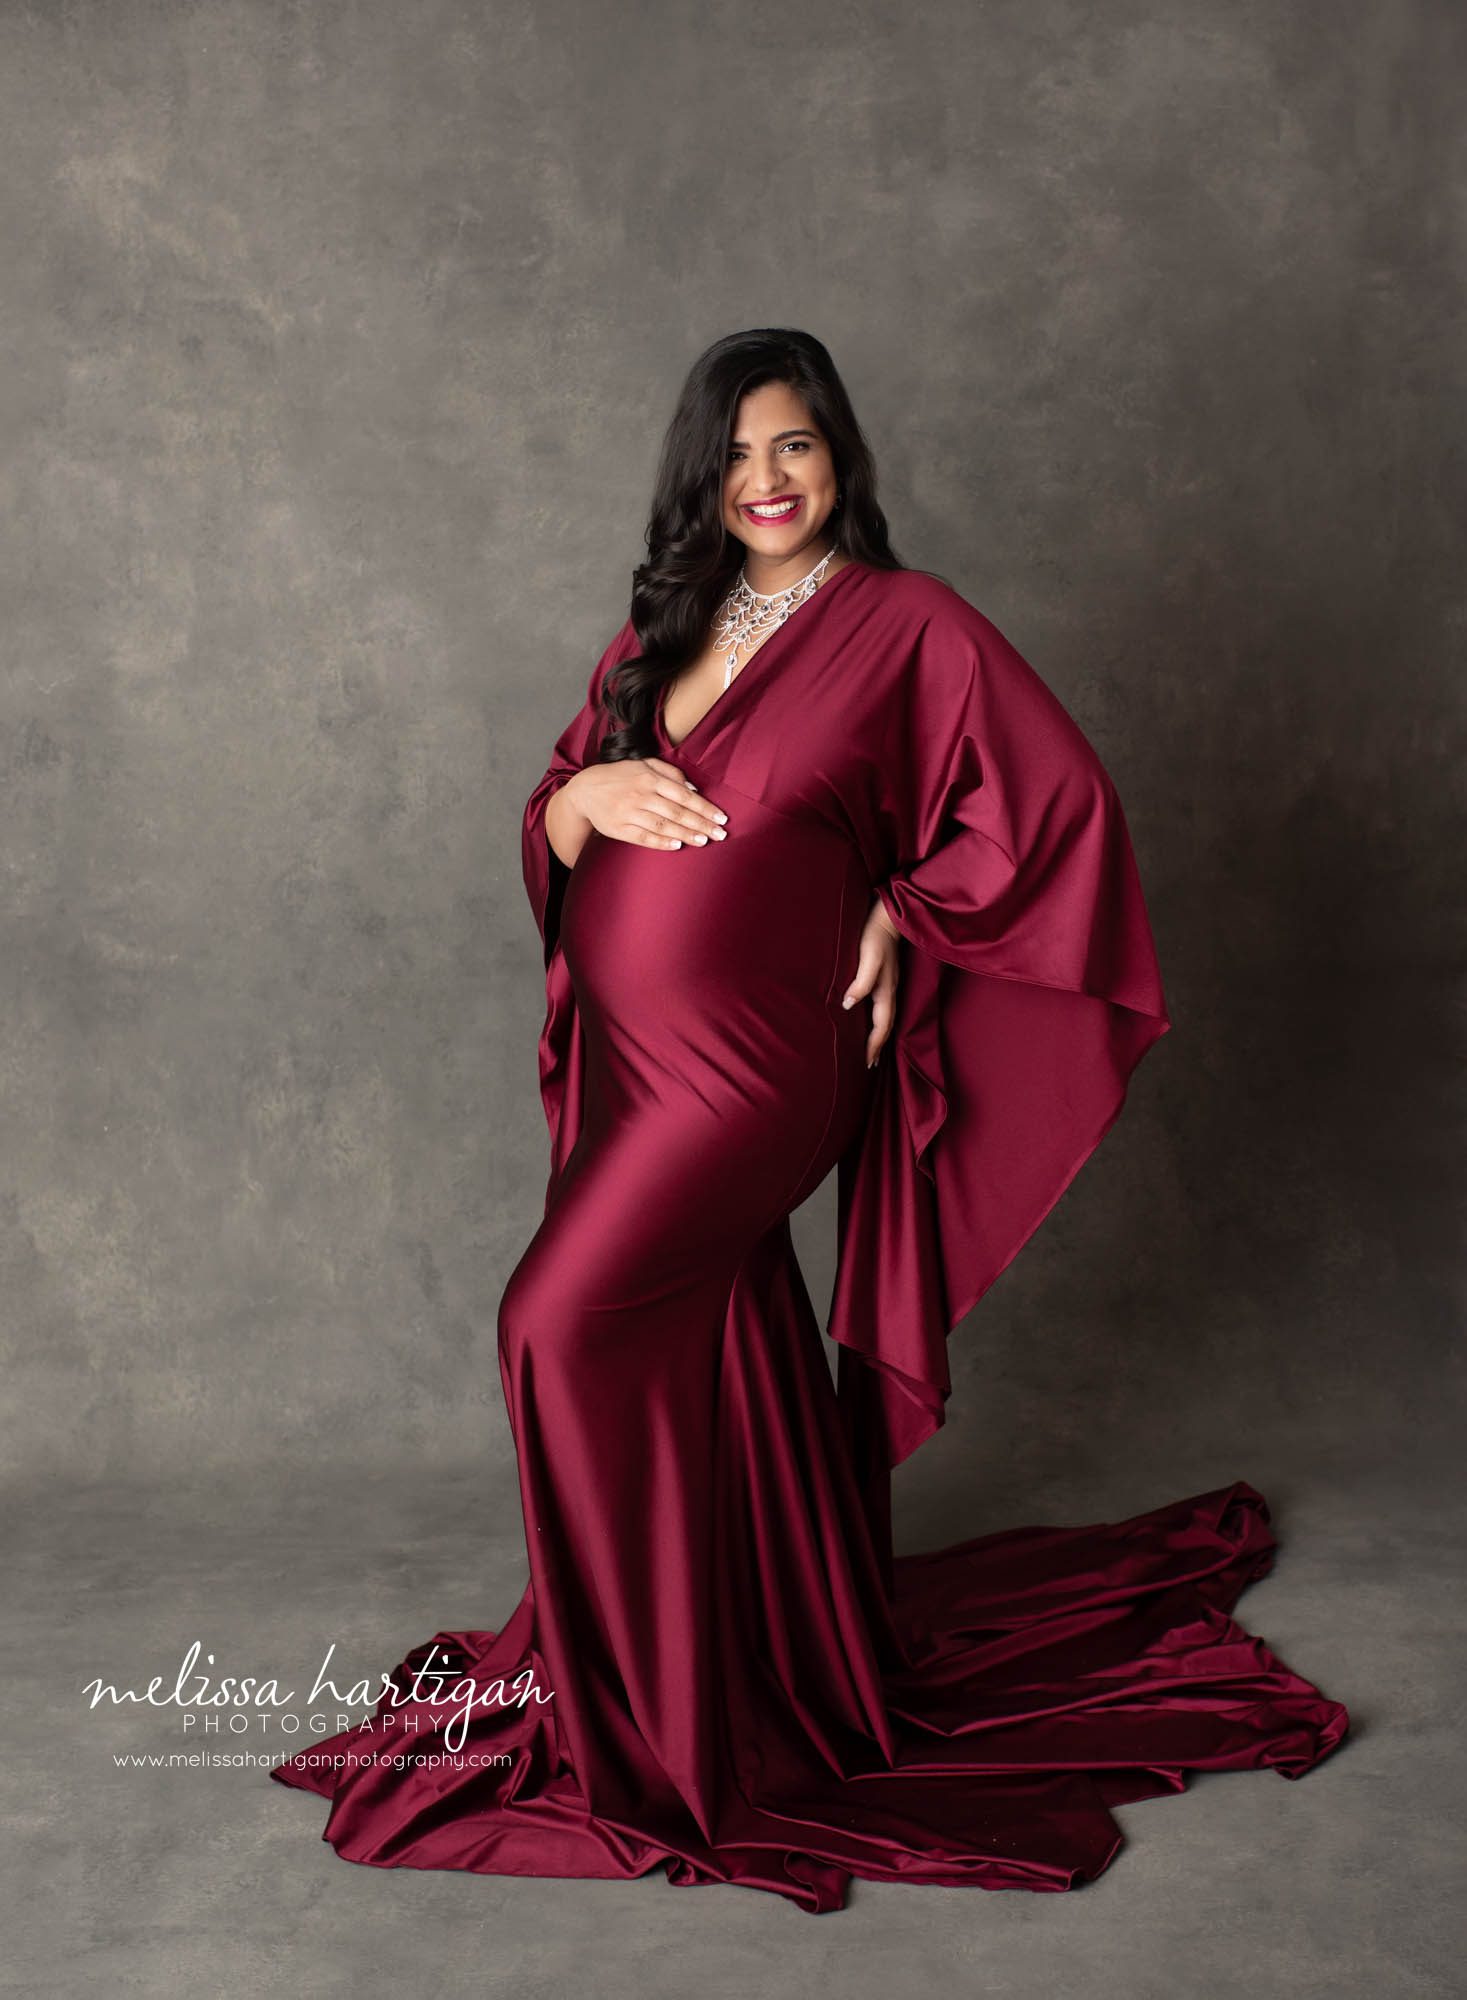 Pregnant mom standing maternity pose mom wearing red jewel toned form fitting maternity gown CT maternity Photographer